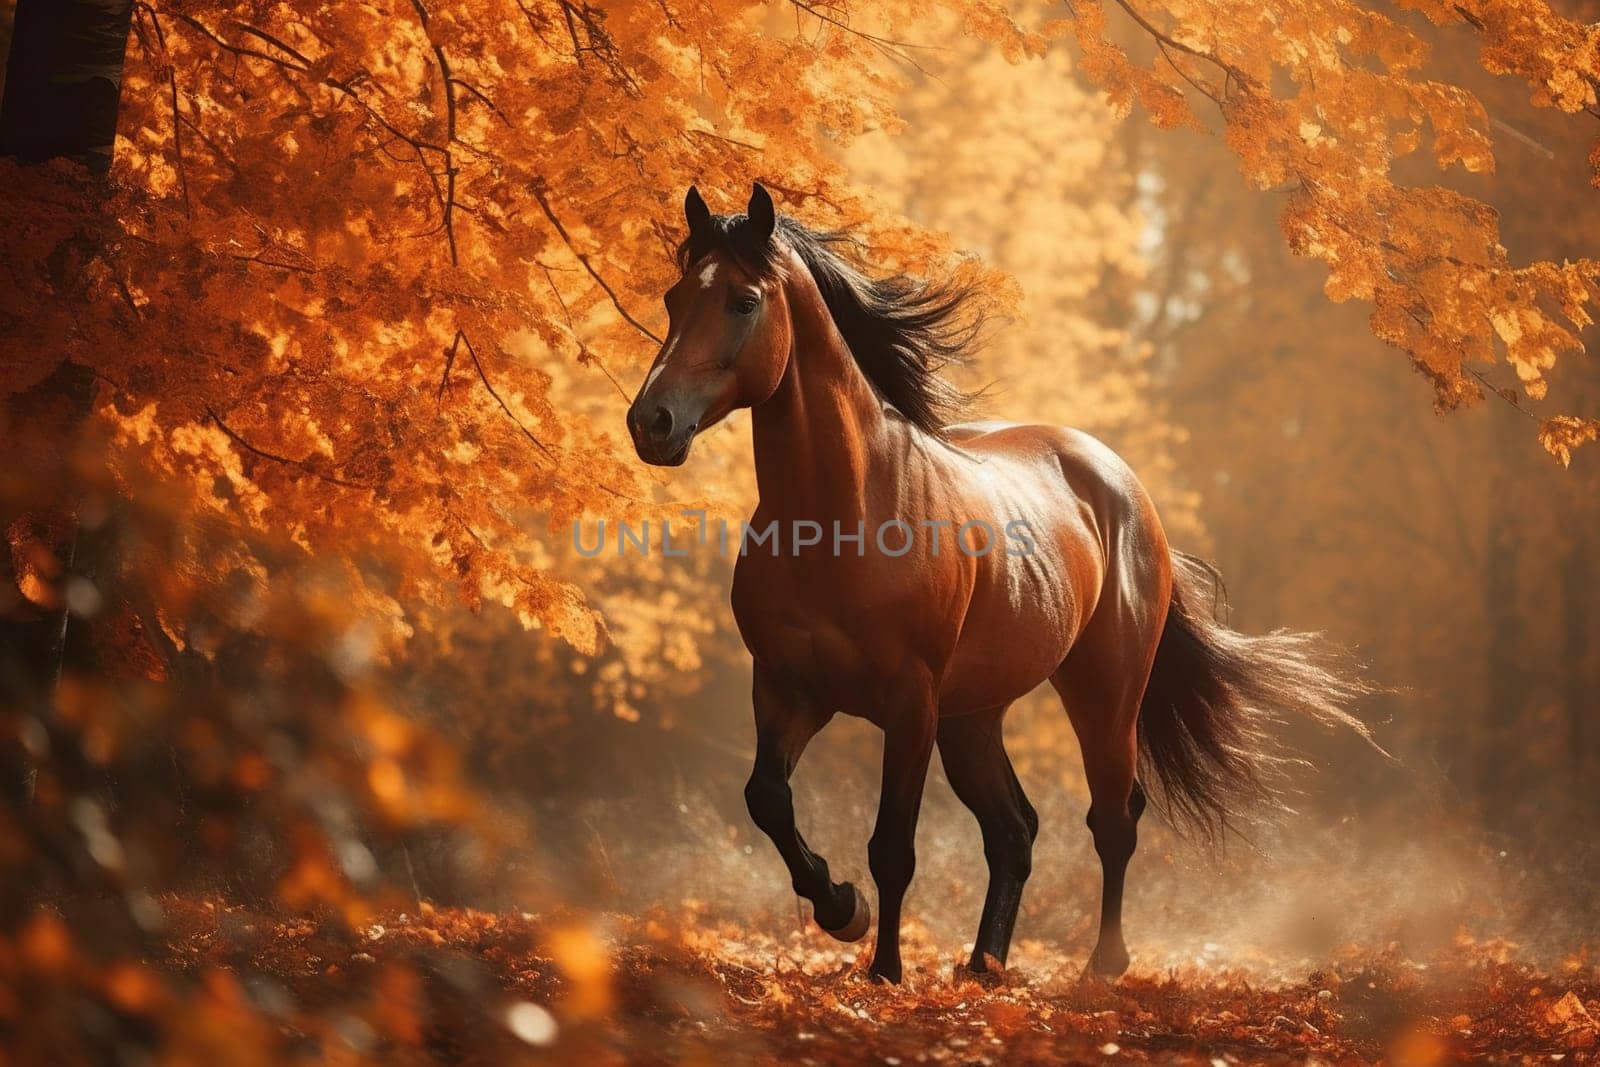 Horse Charges Through An Autumnal Forest Against A Backdrop Of Falling Leaves